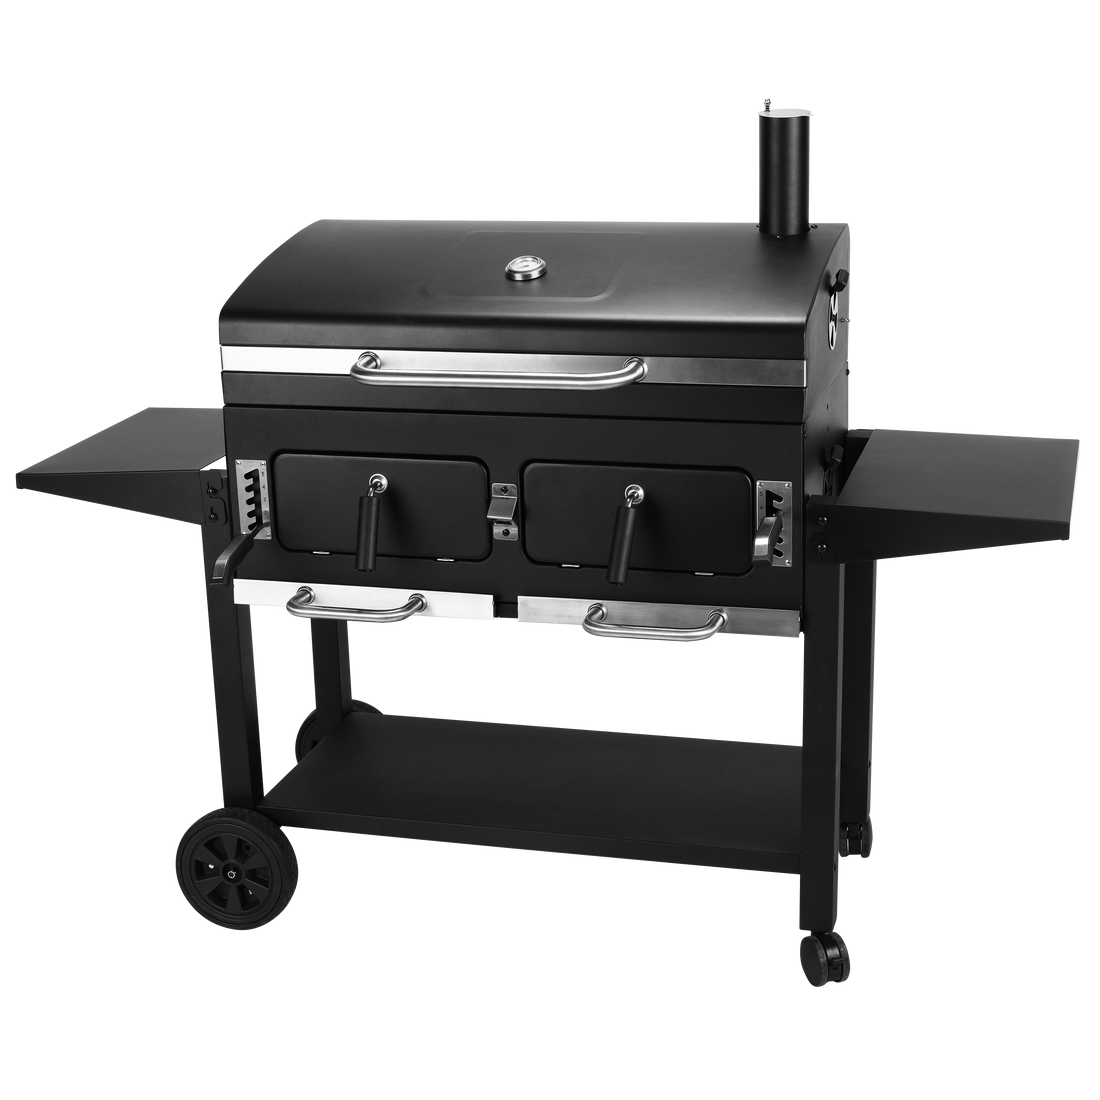 KING SIZE CHARCOAL BARBECUE With 2 independent burners